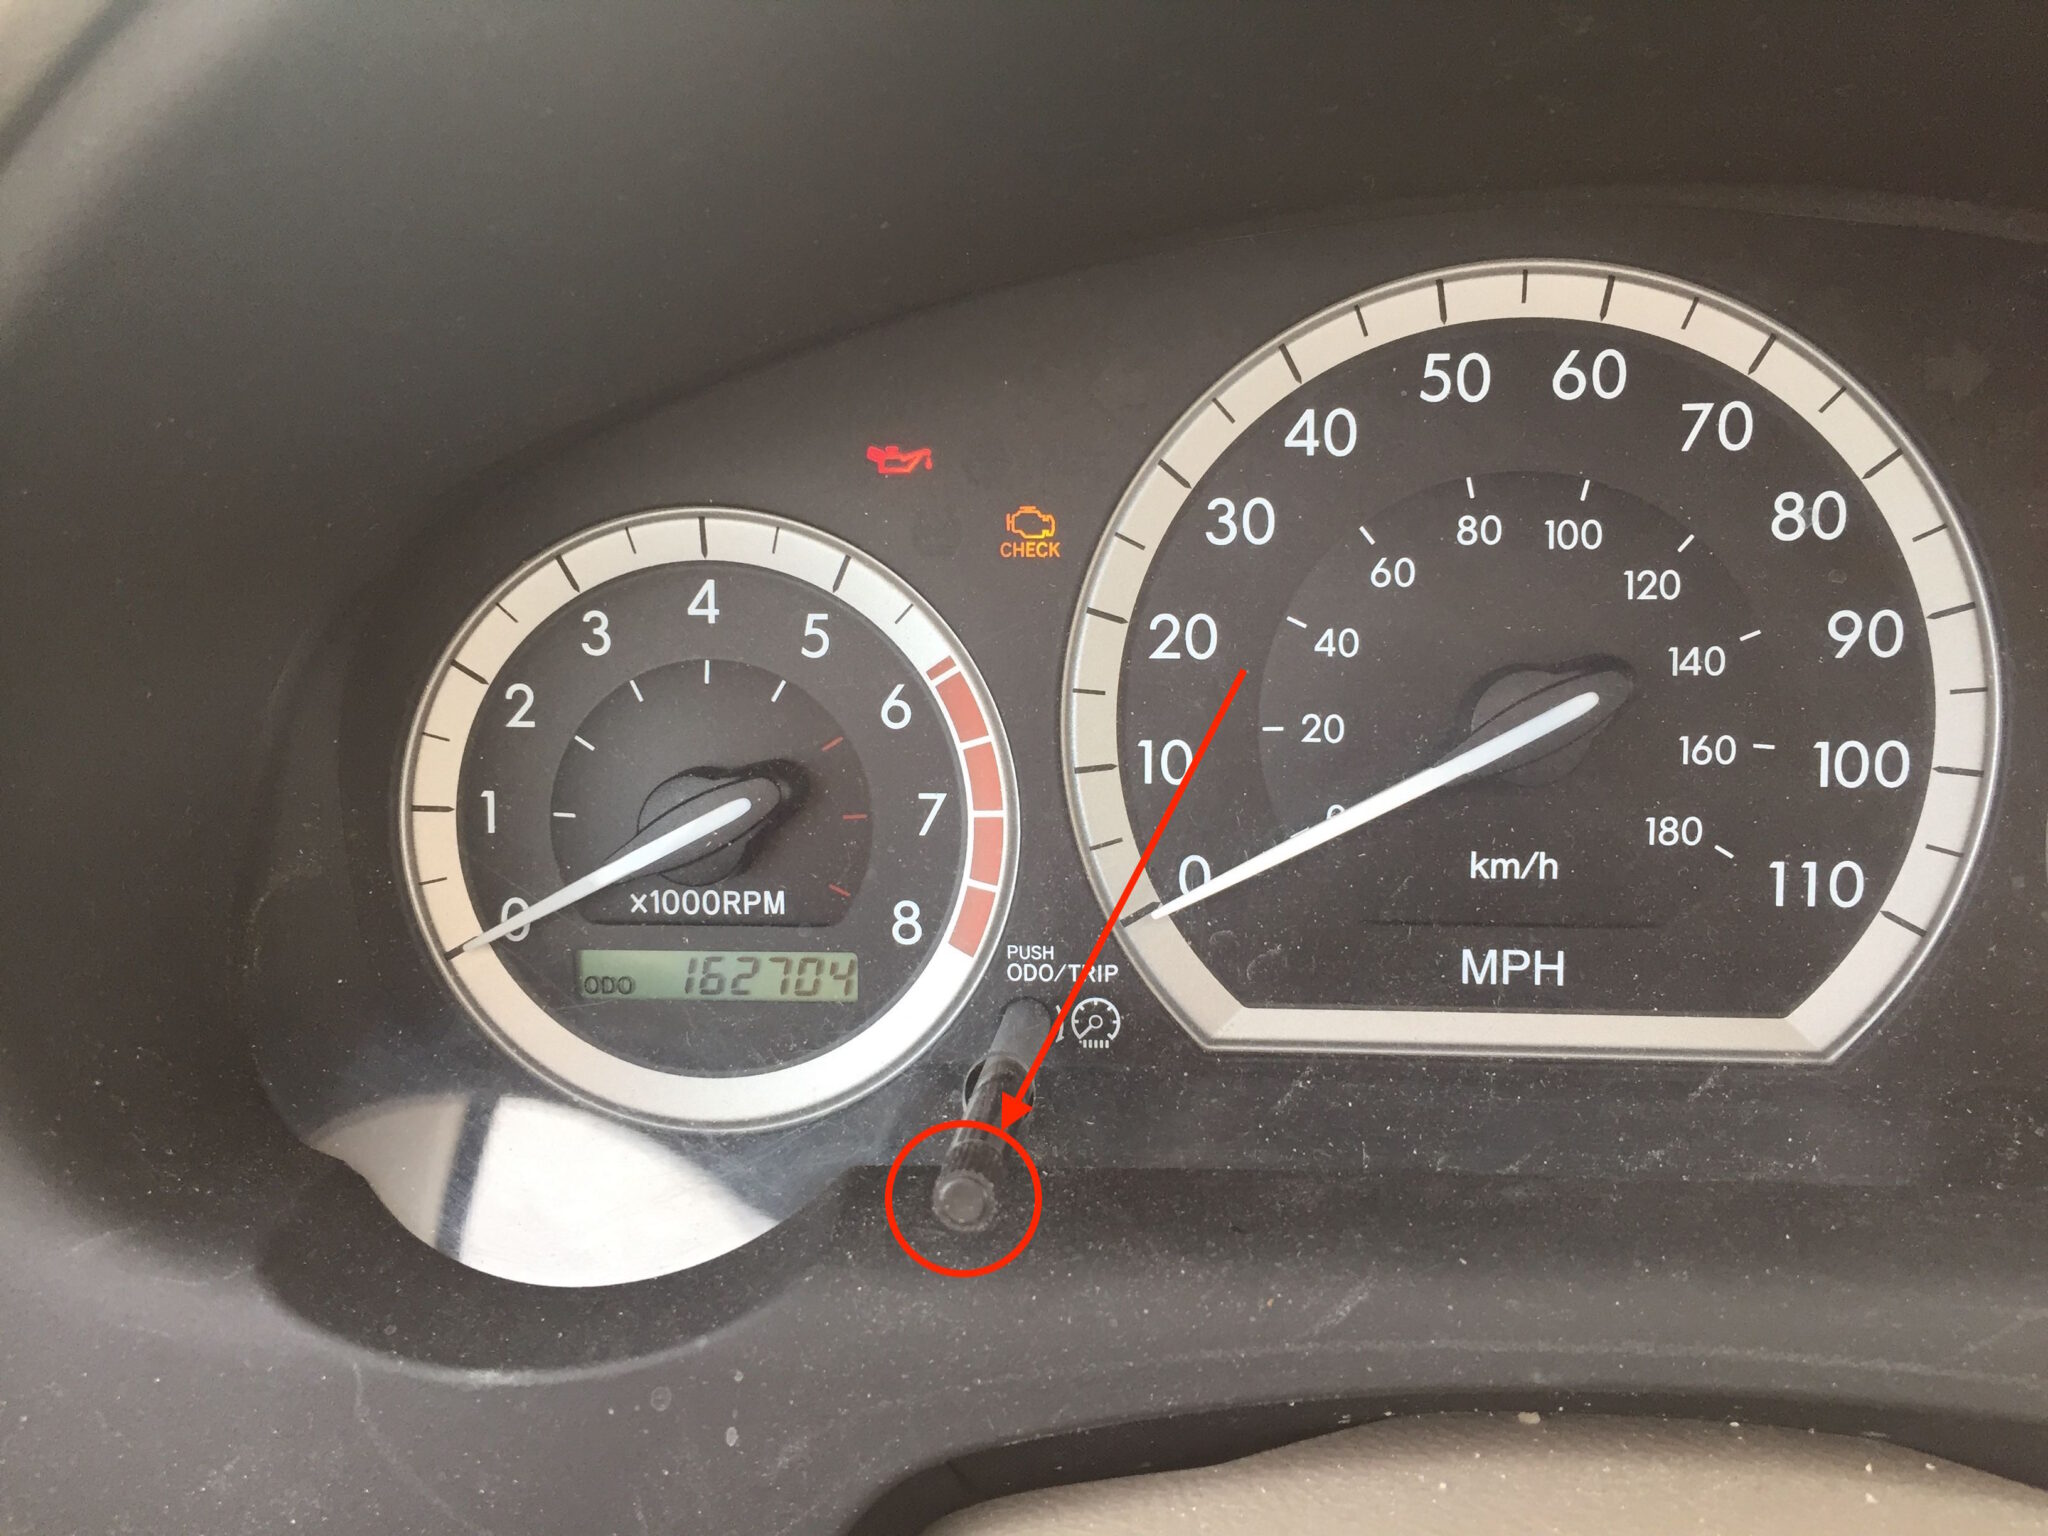 How to Reset Toyota Sienna Maint Reqd Light · Share Your Repair